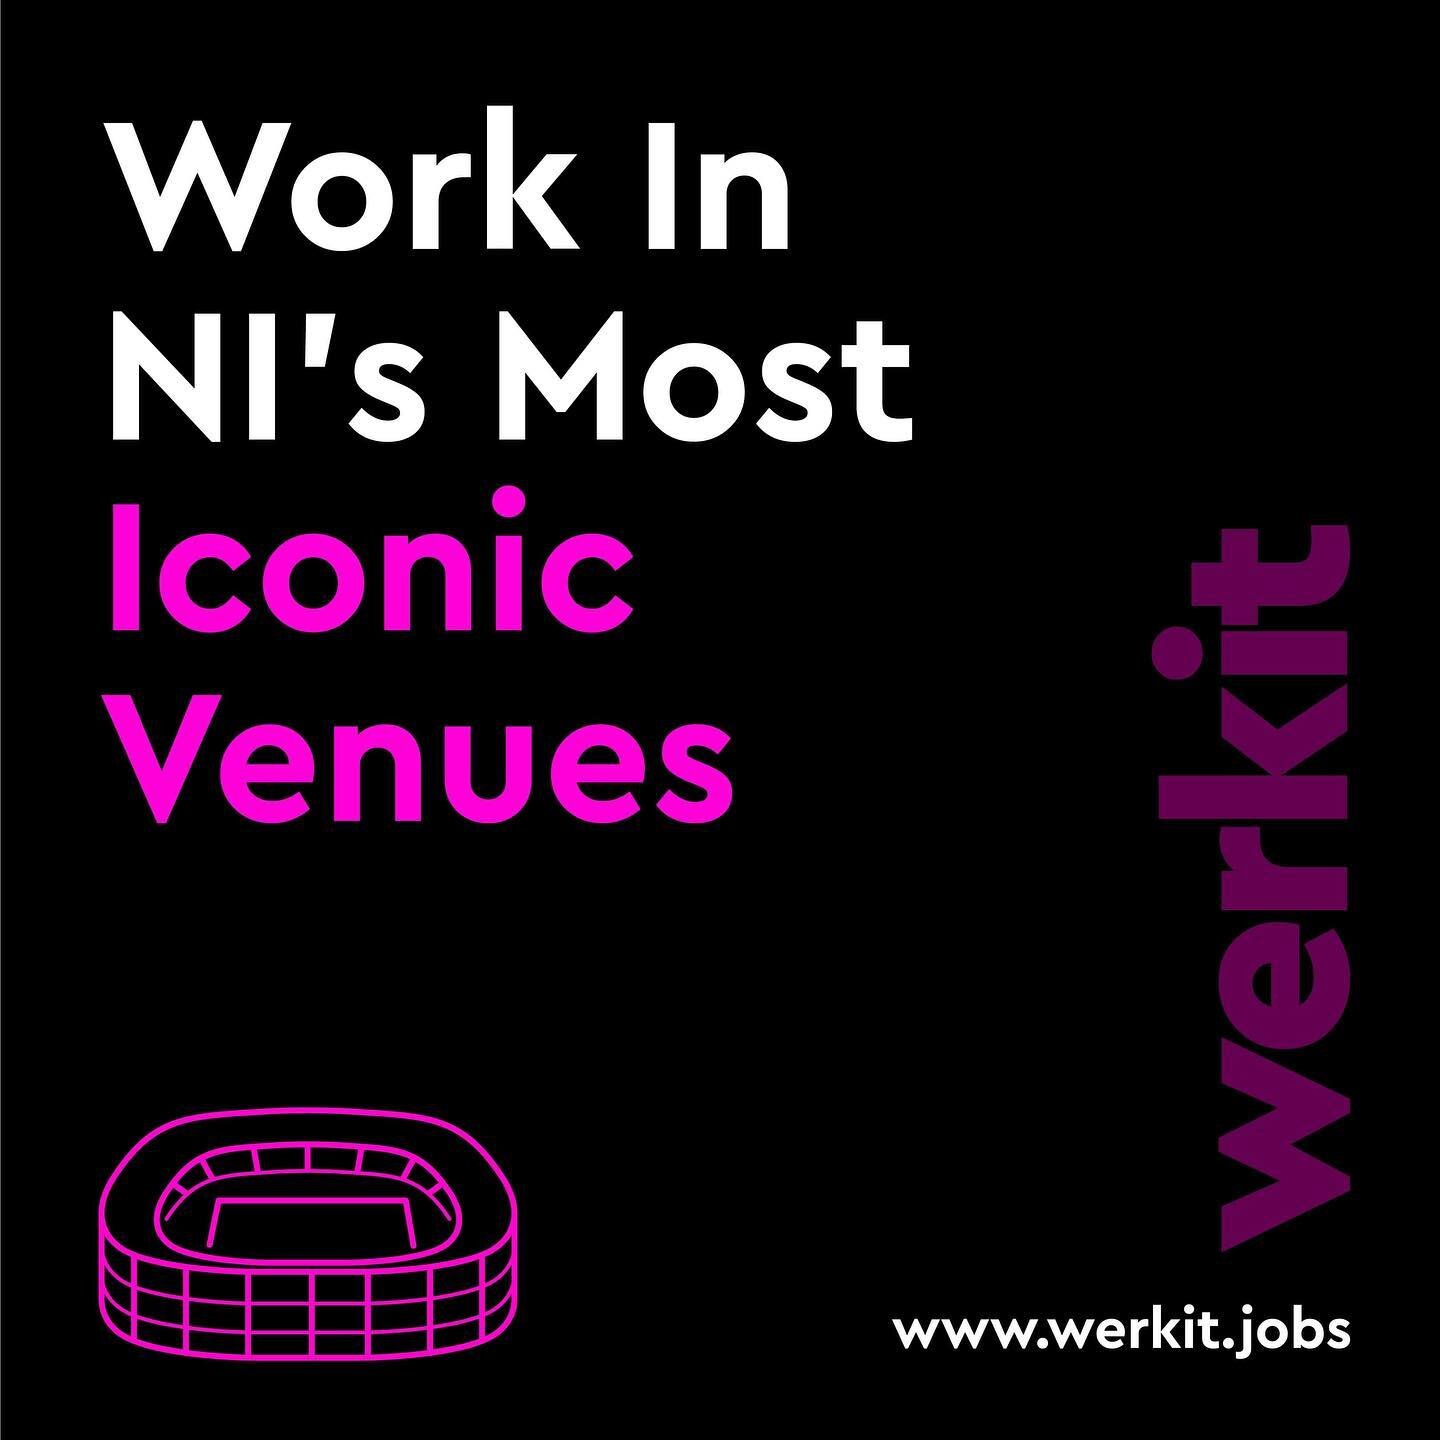 werkit in Northern Ireland&rsquo;s most iconic venues! ⚽️🏇🏉 

Attend a recruitment open day, sign up &amp; decide which event you work at when!

We currently operate in: 
&bull; Ulster Rugby Kingspan Stadium 🏉 
&bull; The National Stadium ⚽️ 
&bul